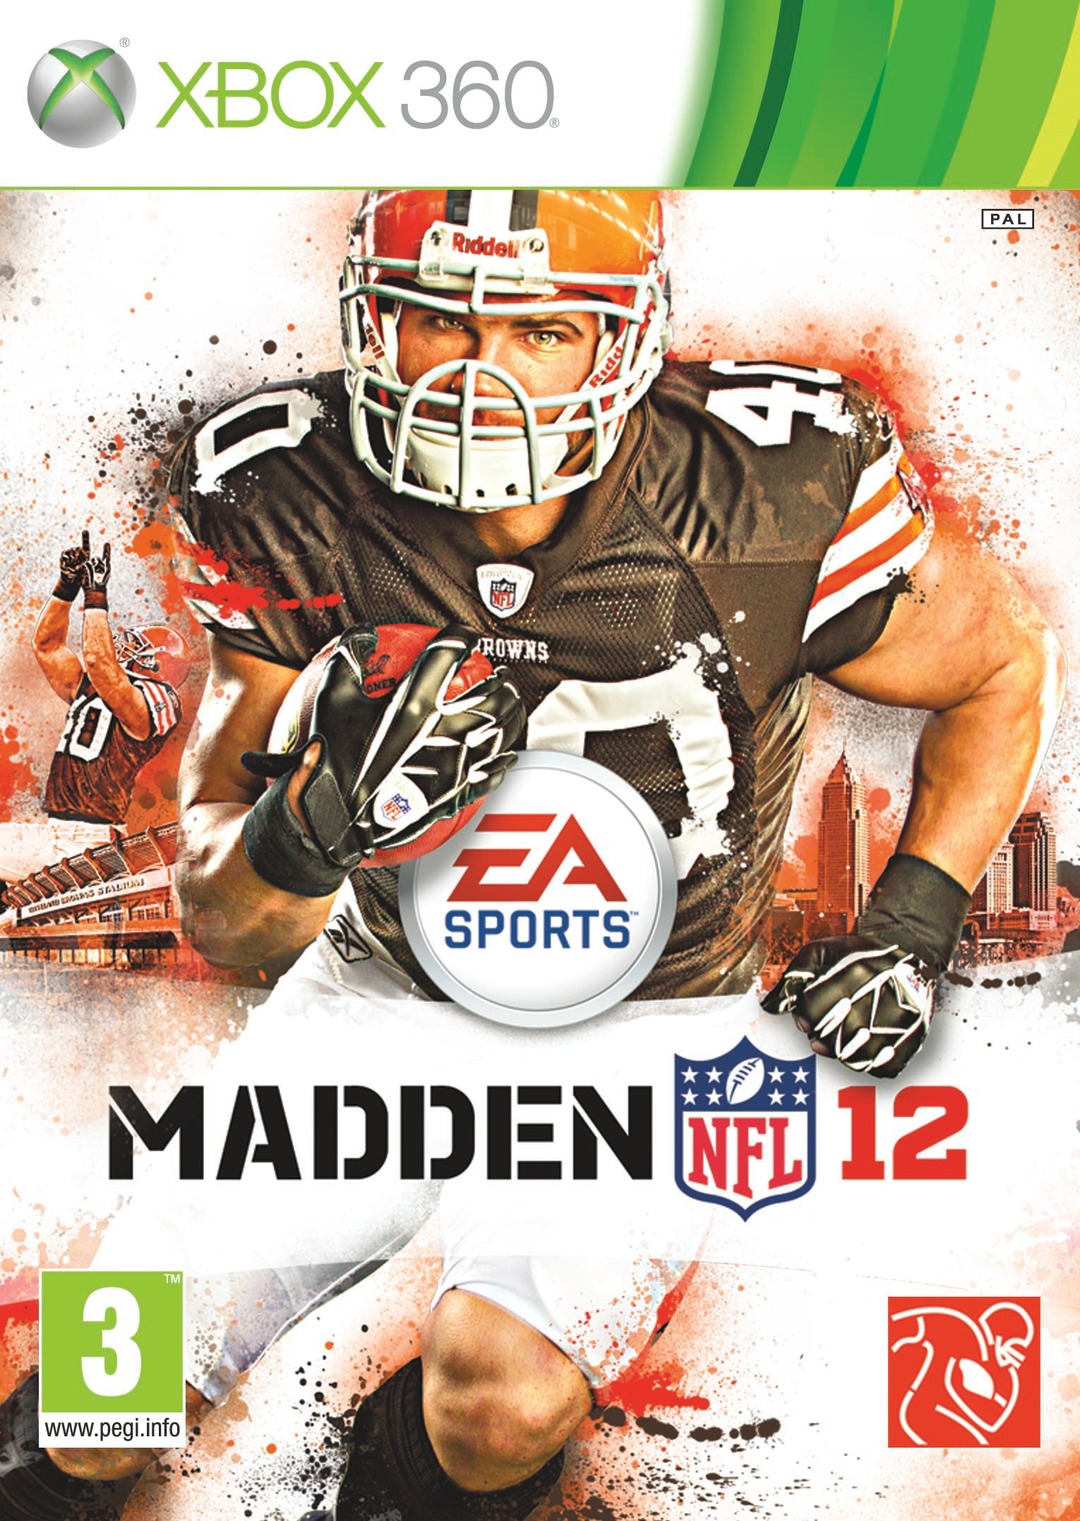 Madden NFL 12 [Region FREE] (Exclu) [FS][US]  Jaquette-madden-nfl-12-xbox-360-cover-avant-g-1306870307